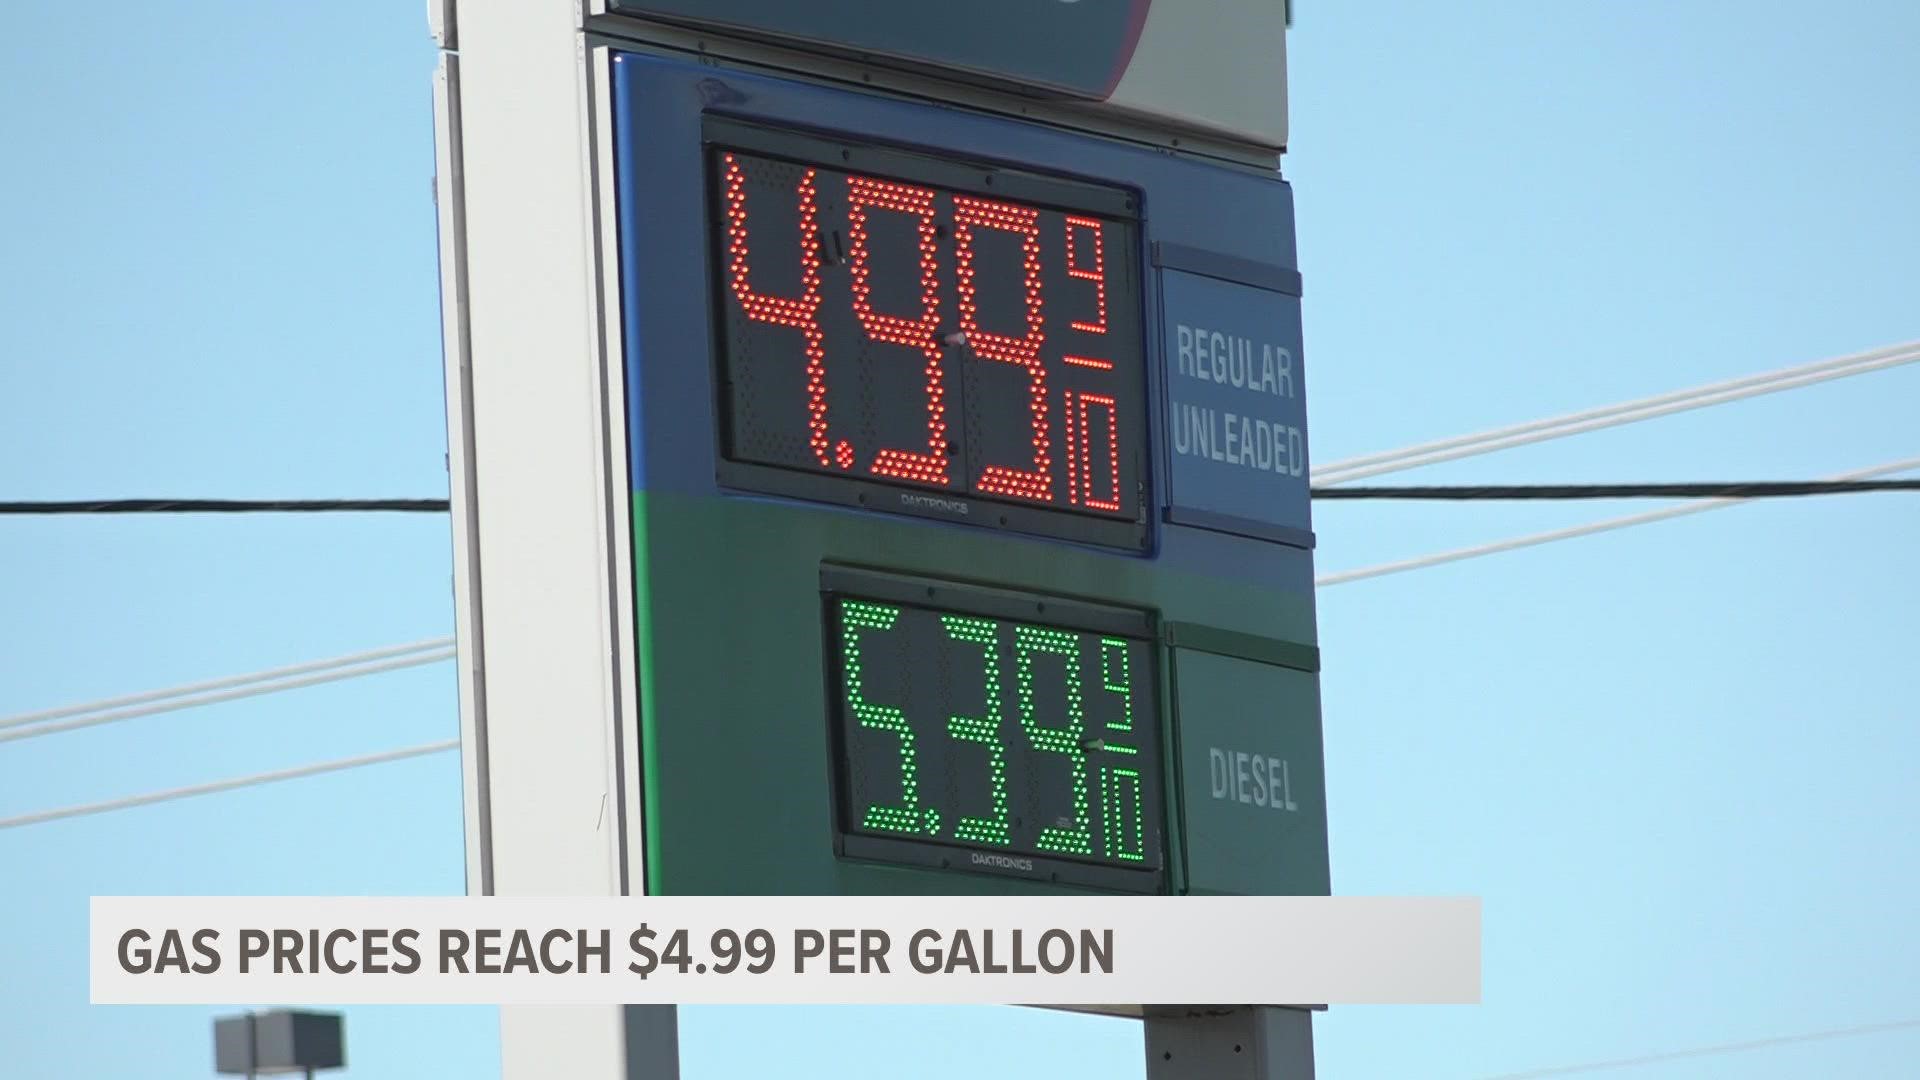 For drivers out there, it's both frustrating and concerning. Just two days ago, gas prices increased to about $4.80 per gallon.